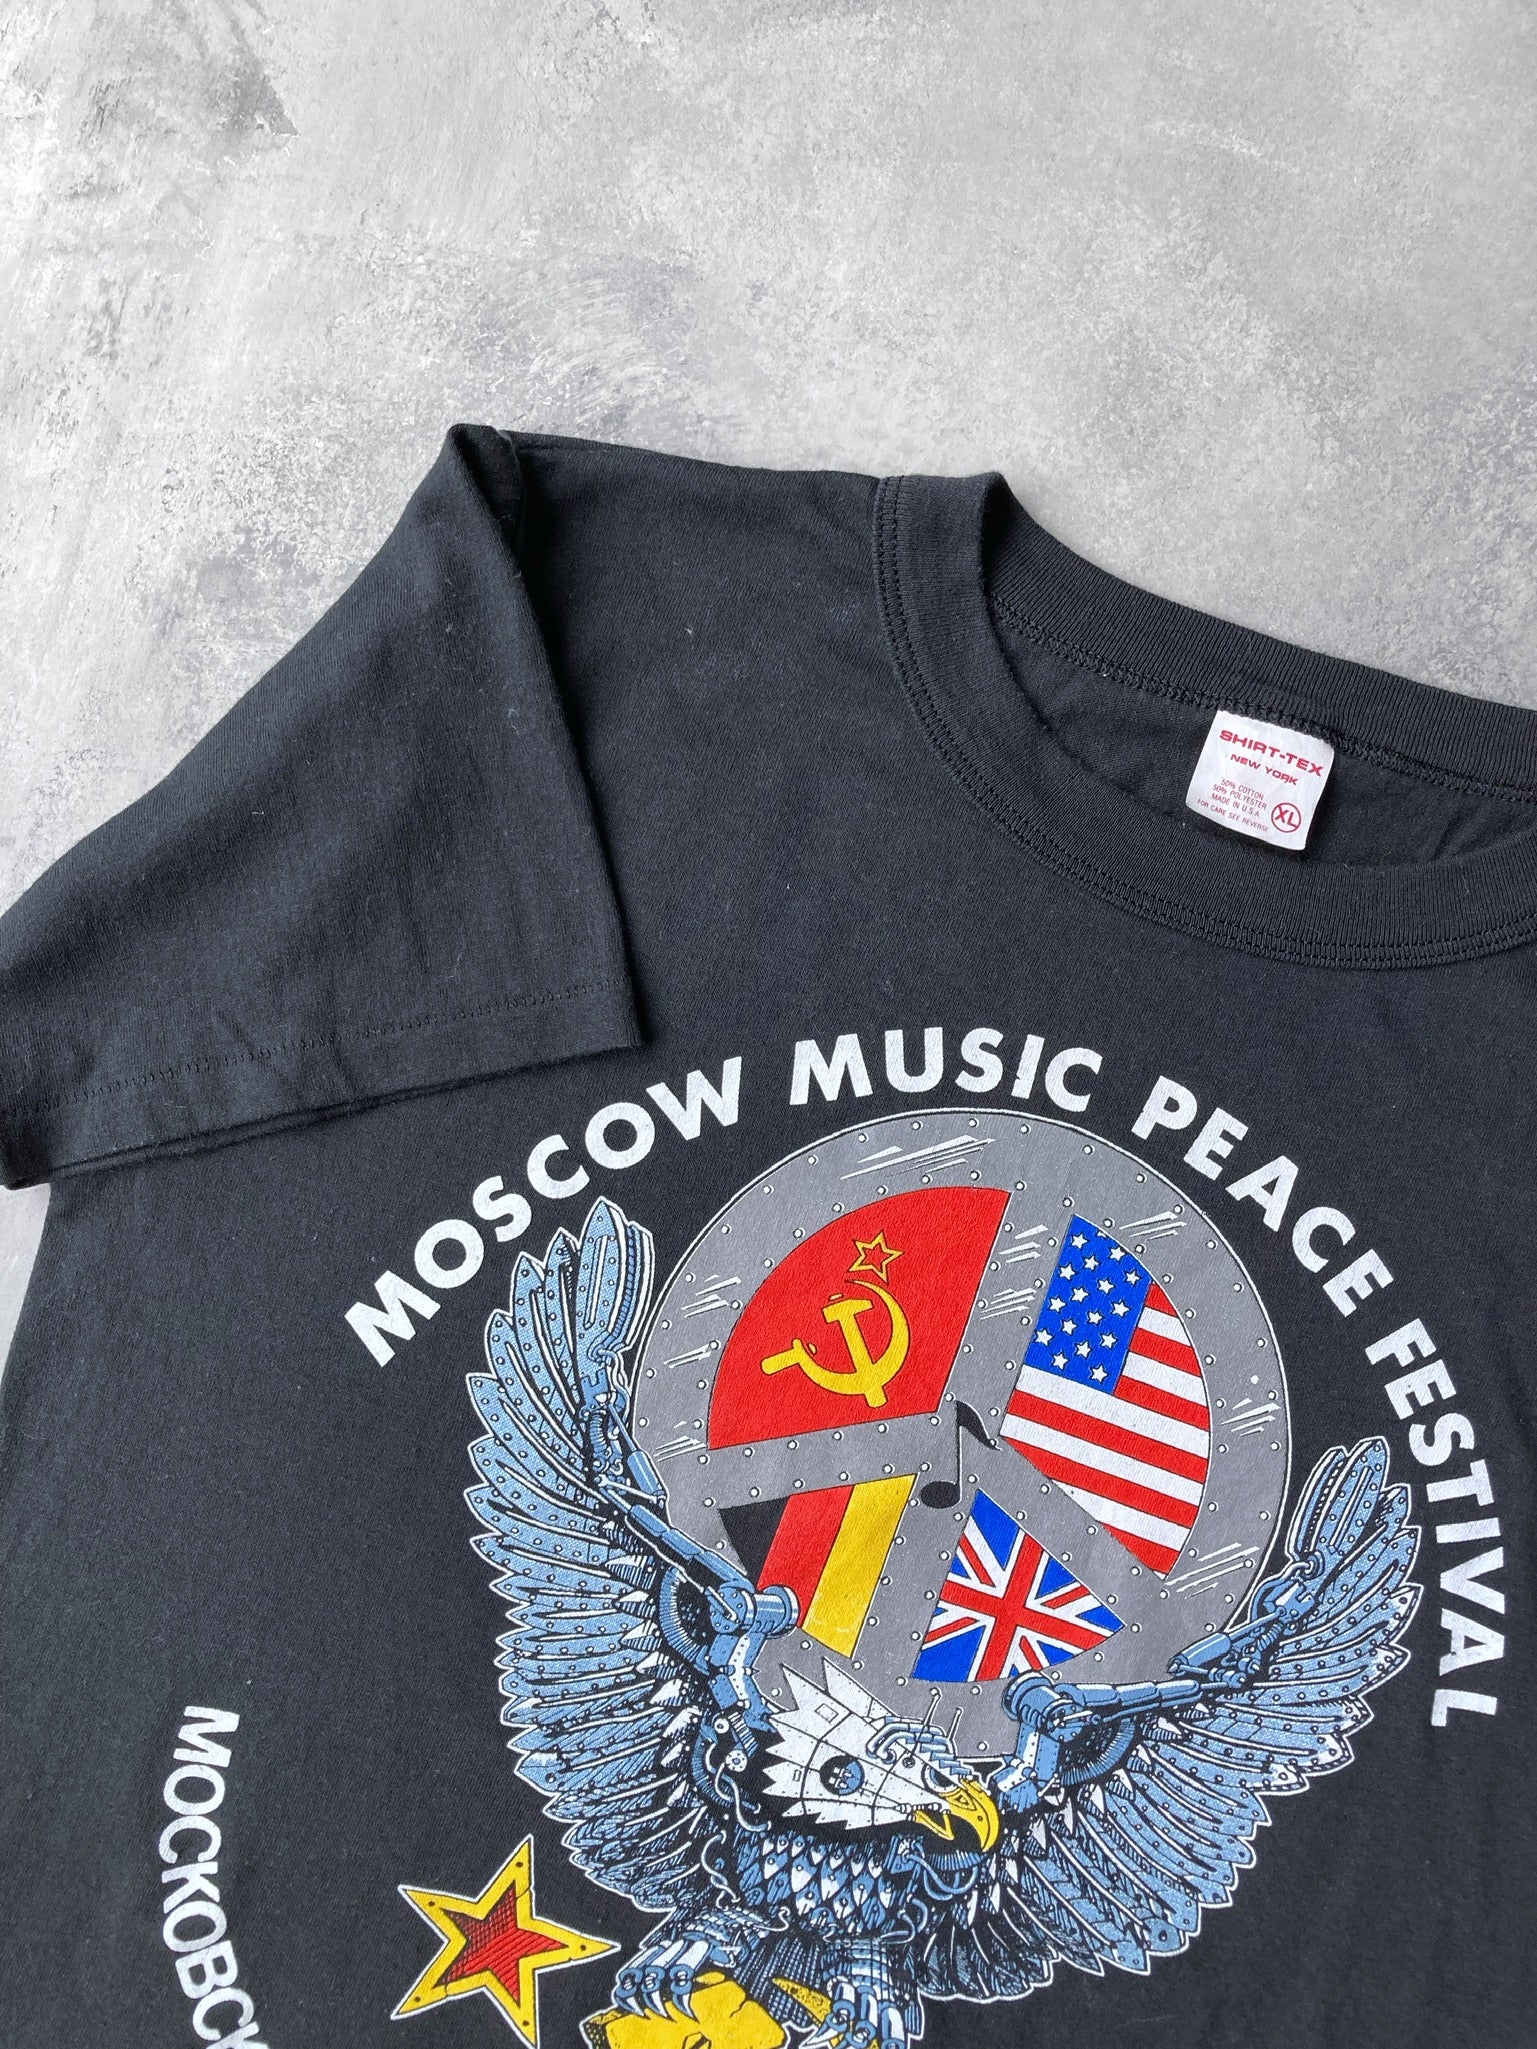 Moscow Music Peace Festival T-Shirt 80's - Large – Lot 1 Vintage